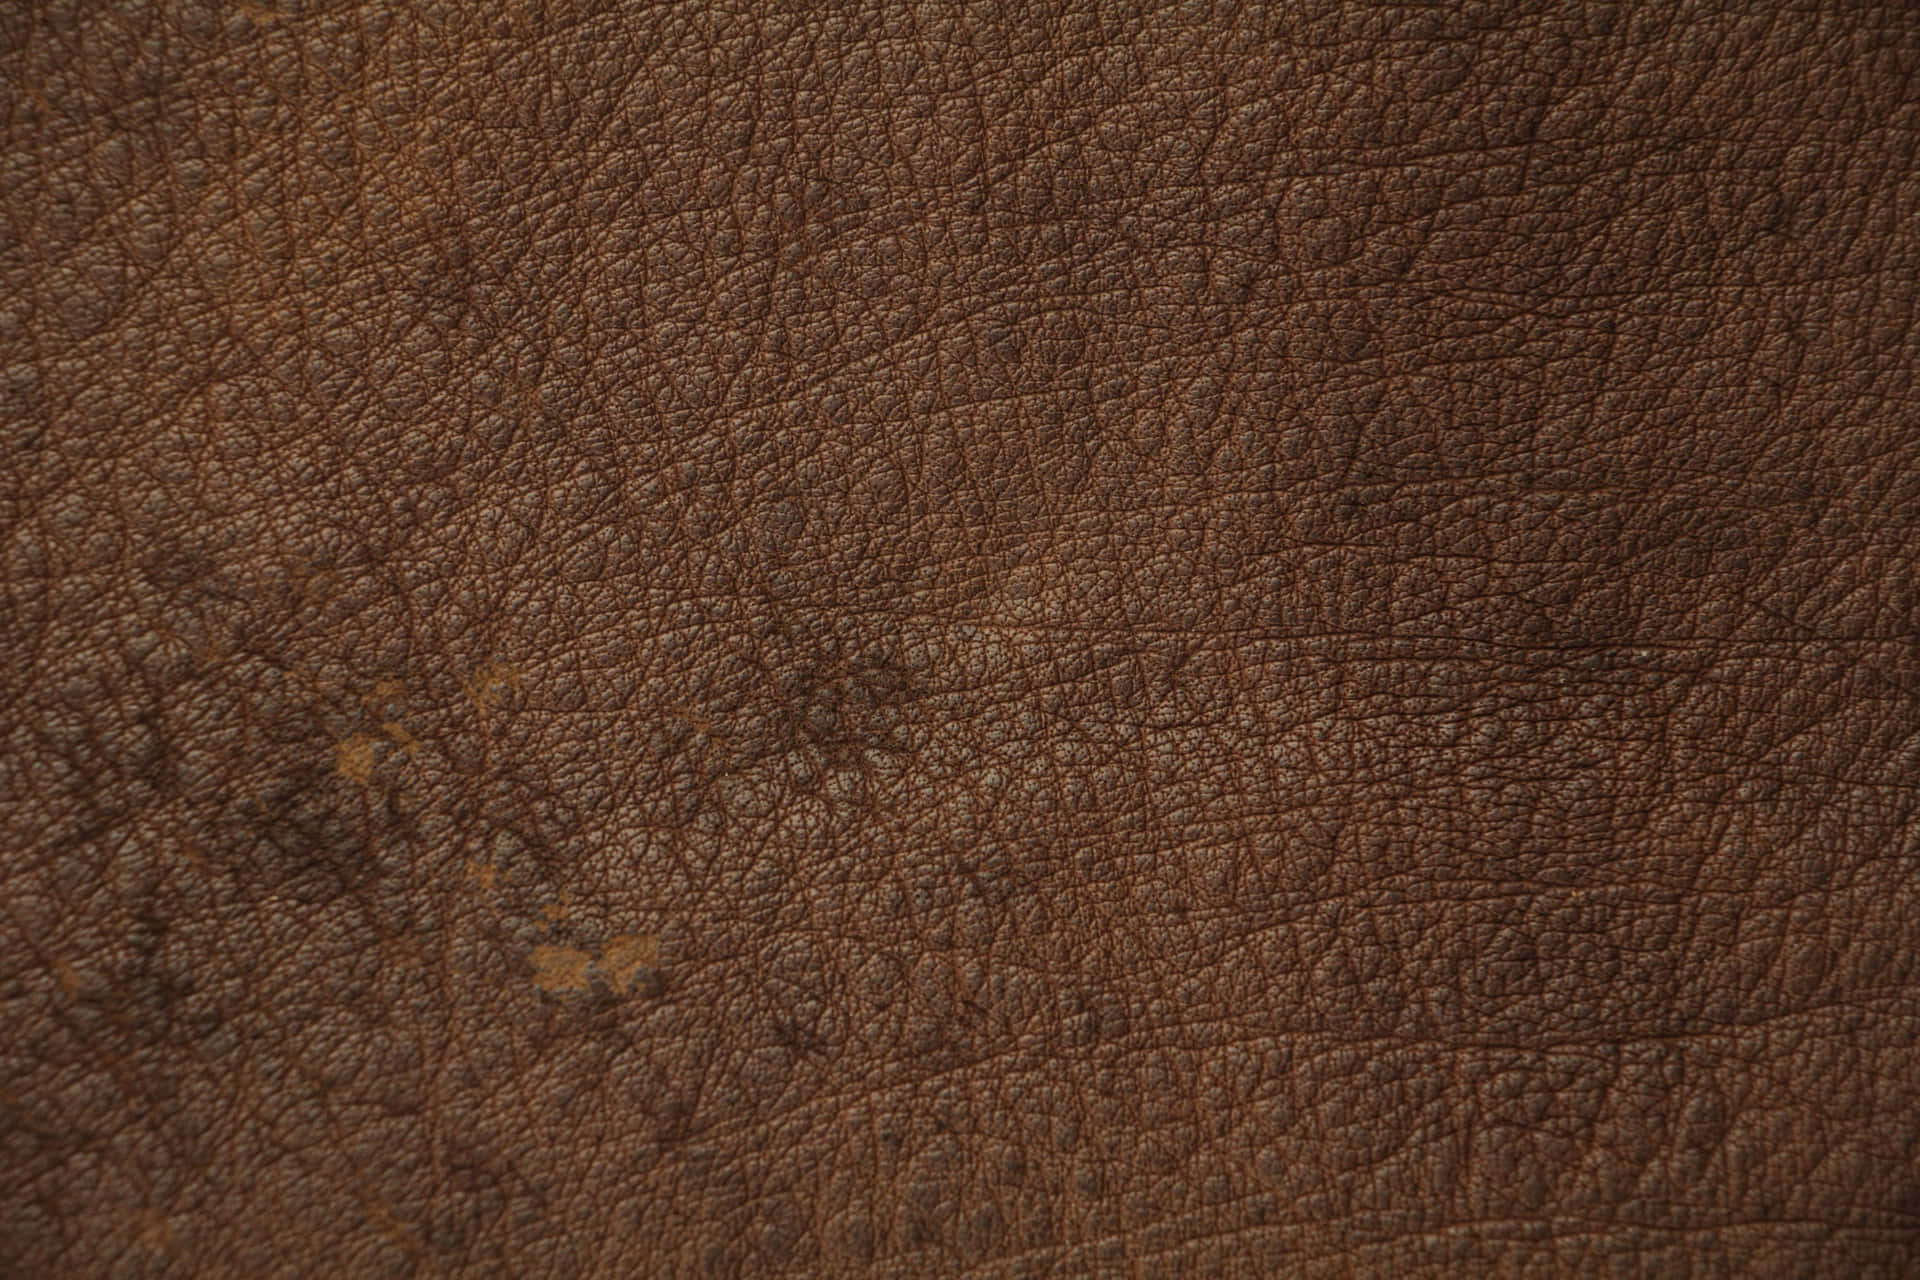 Luxurious Brown Leather Texture Wallpaper